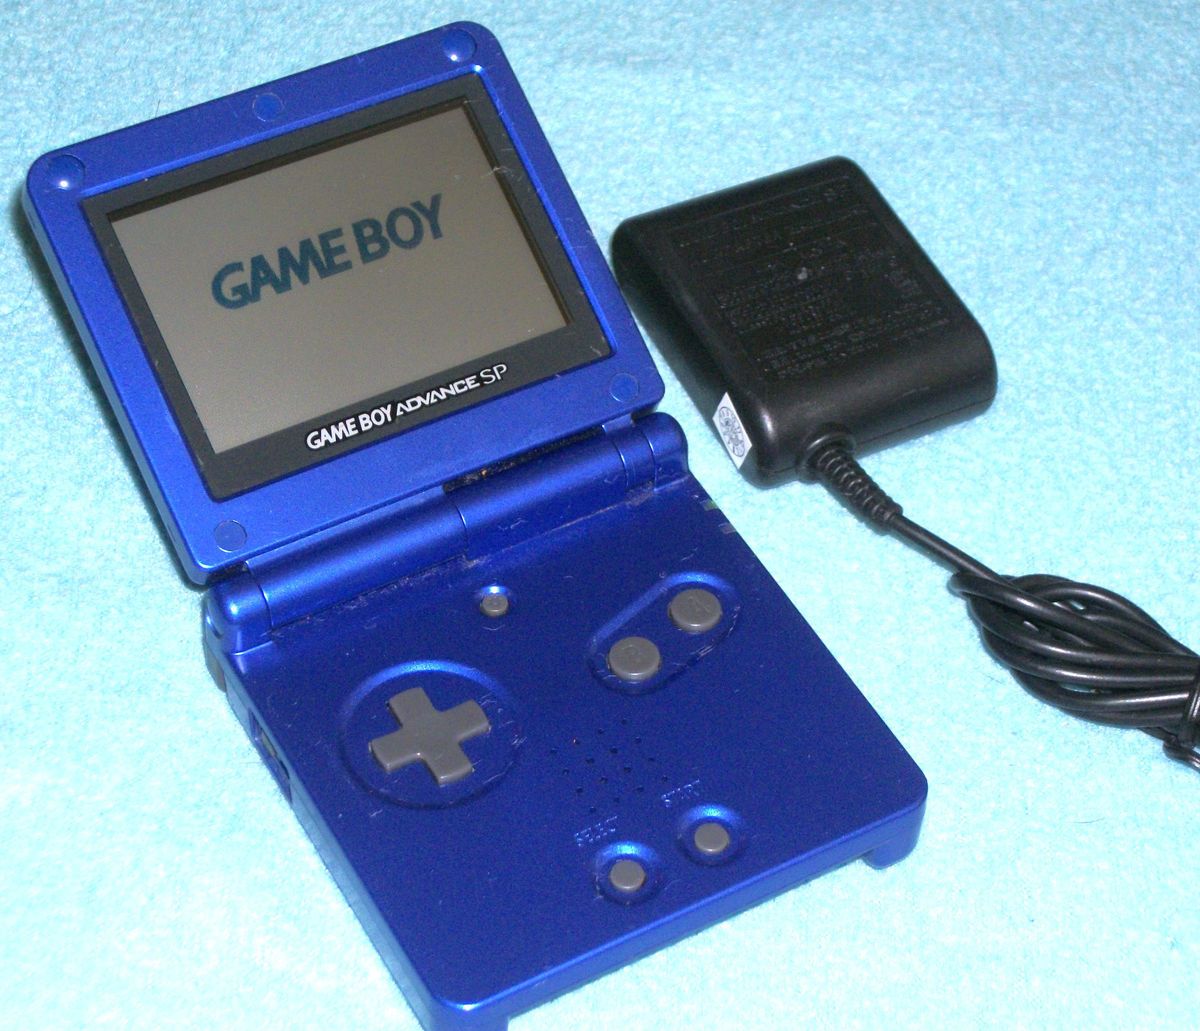 BLUE Nintendo Game Boy Advance SP System Charger GameBoy GBA